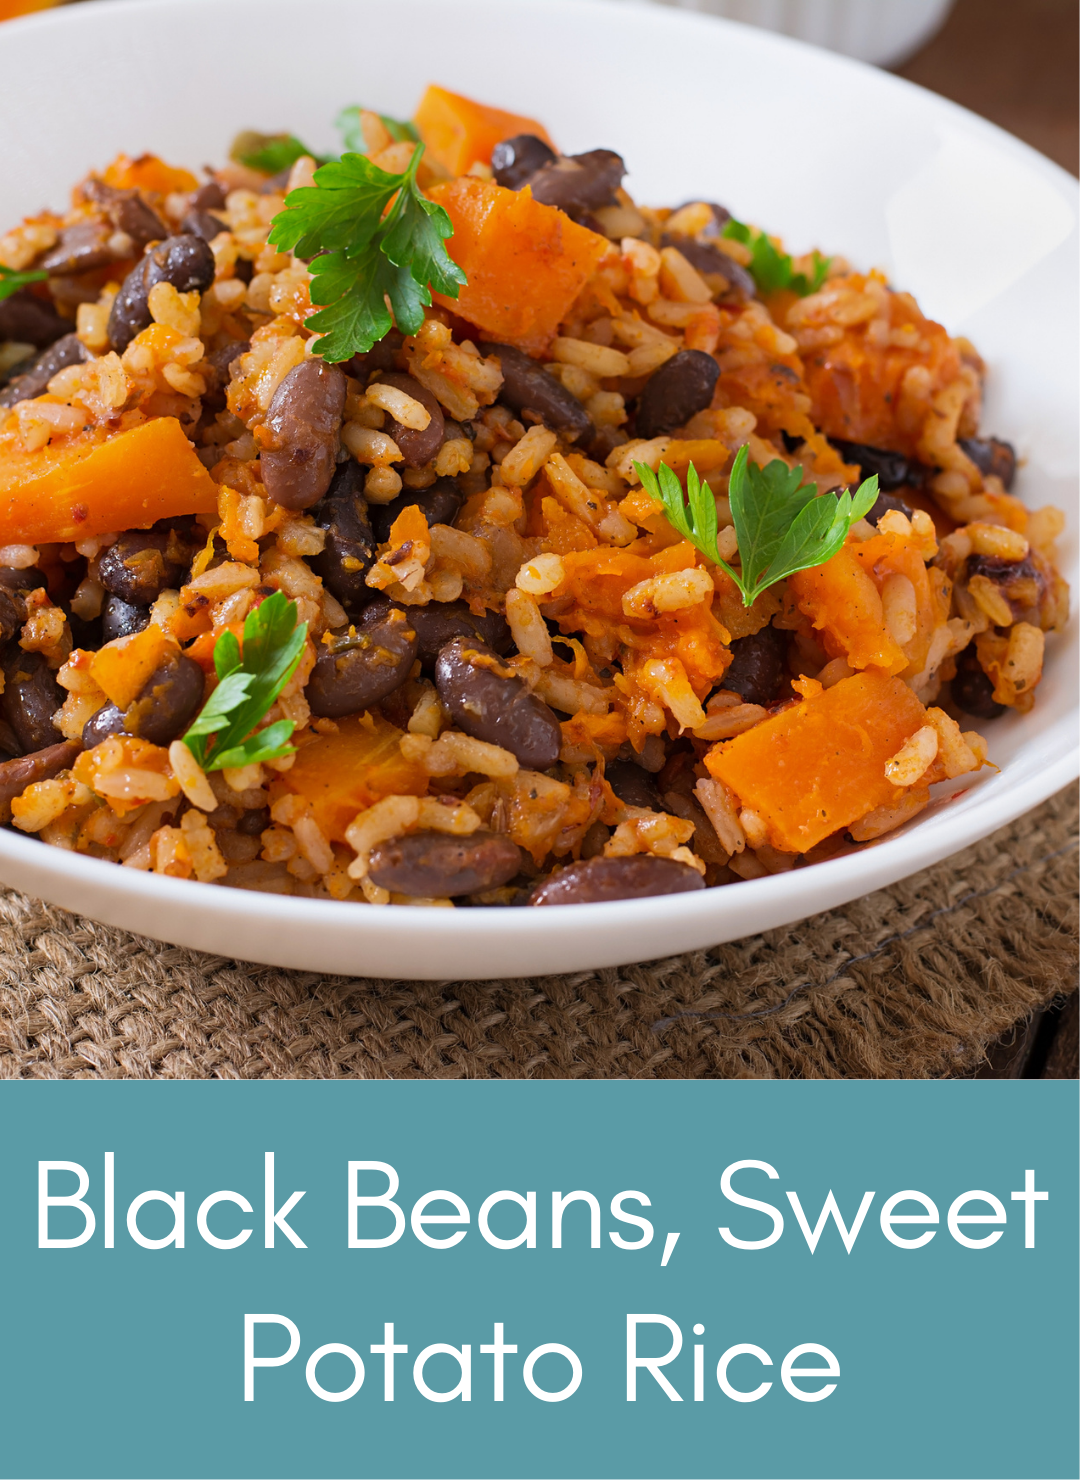 Black beans sweet potato rice Picture with link to recipe